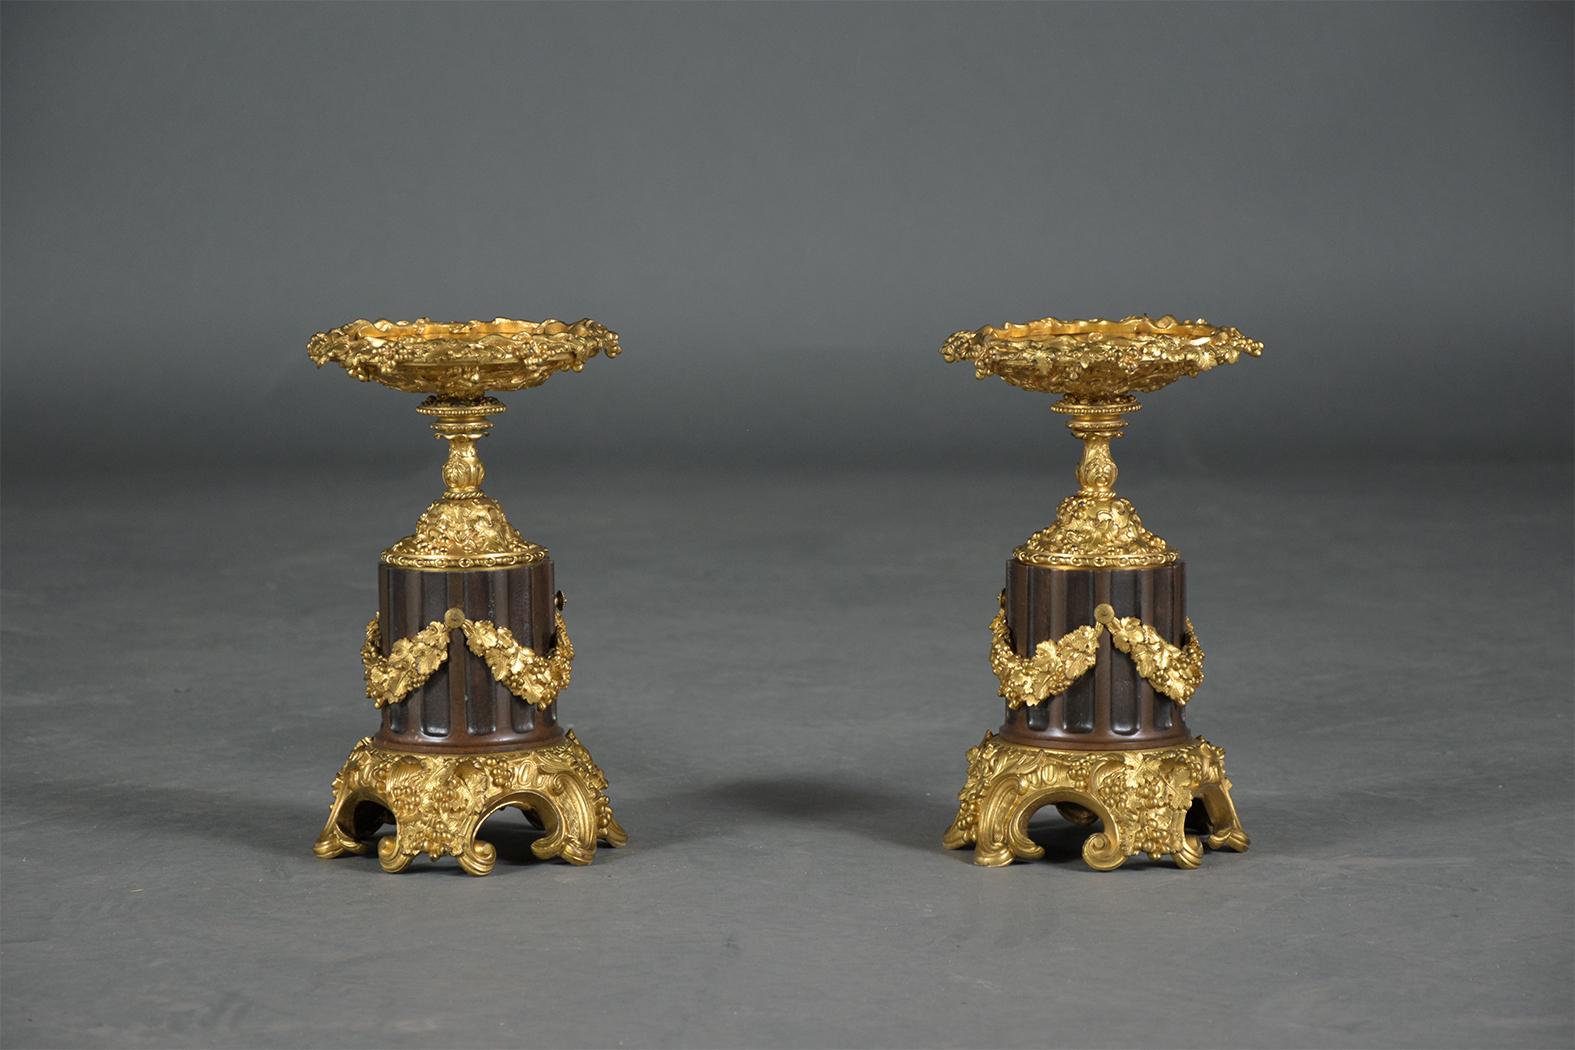 Carved Elegant 19th-Century French Bronzed Urns with Gold Ormolu Details For Sale